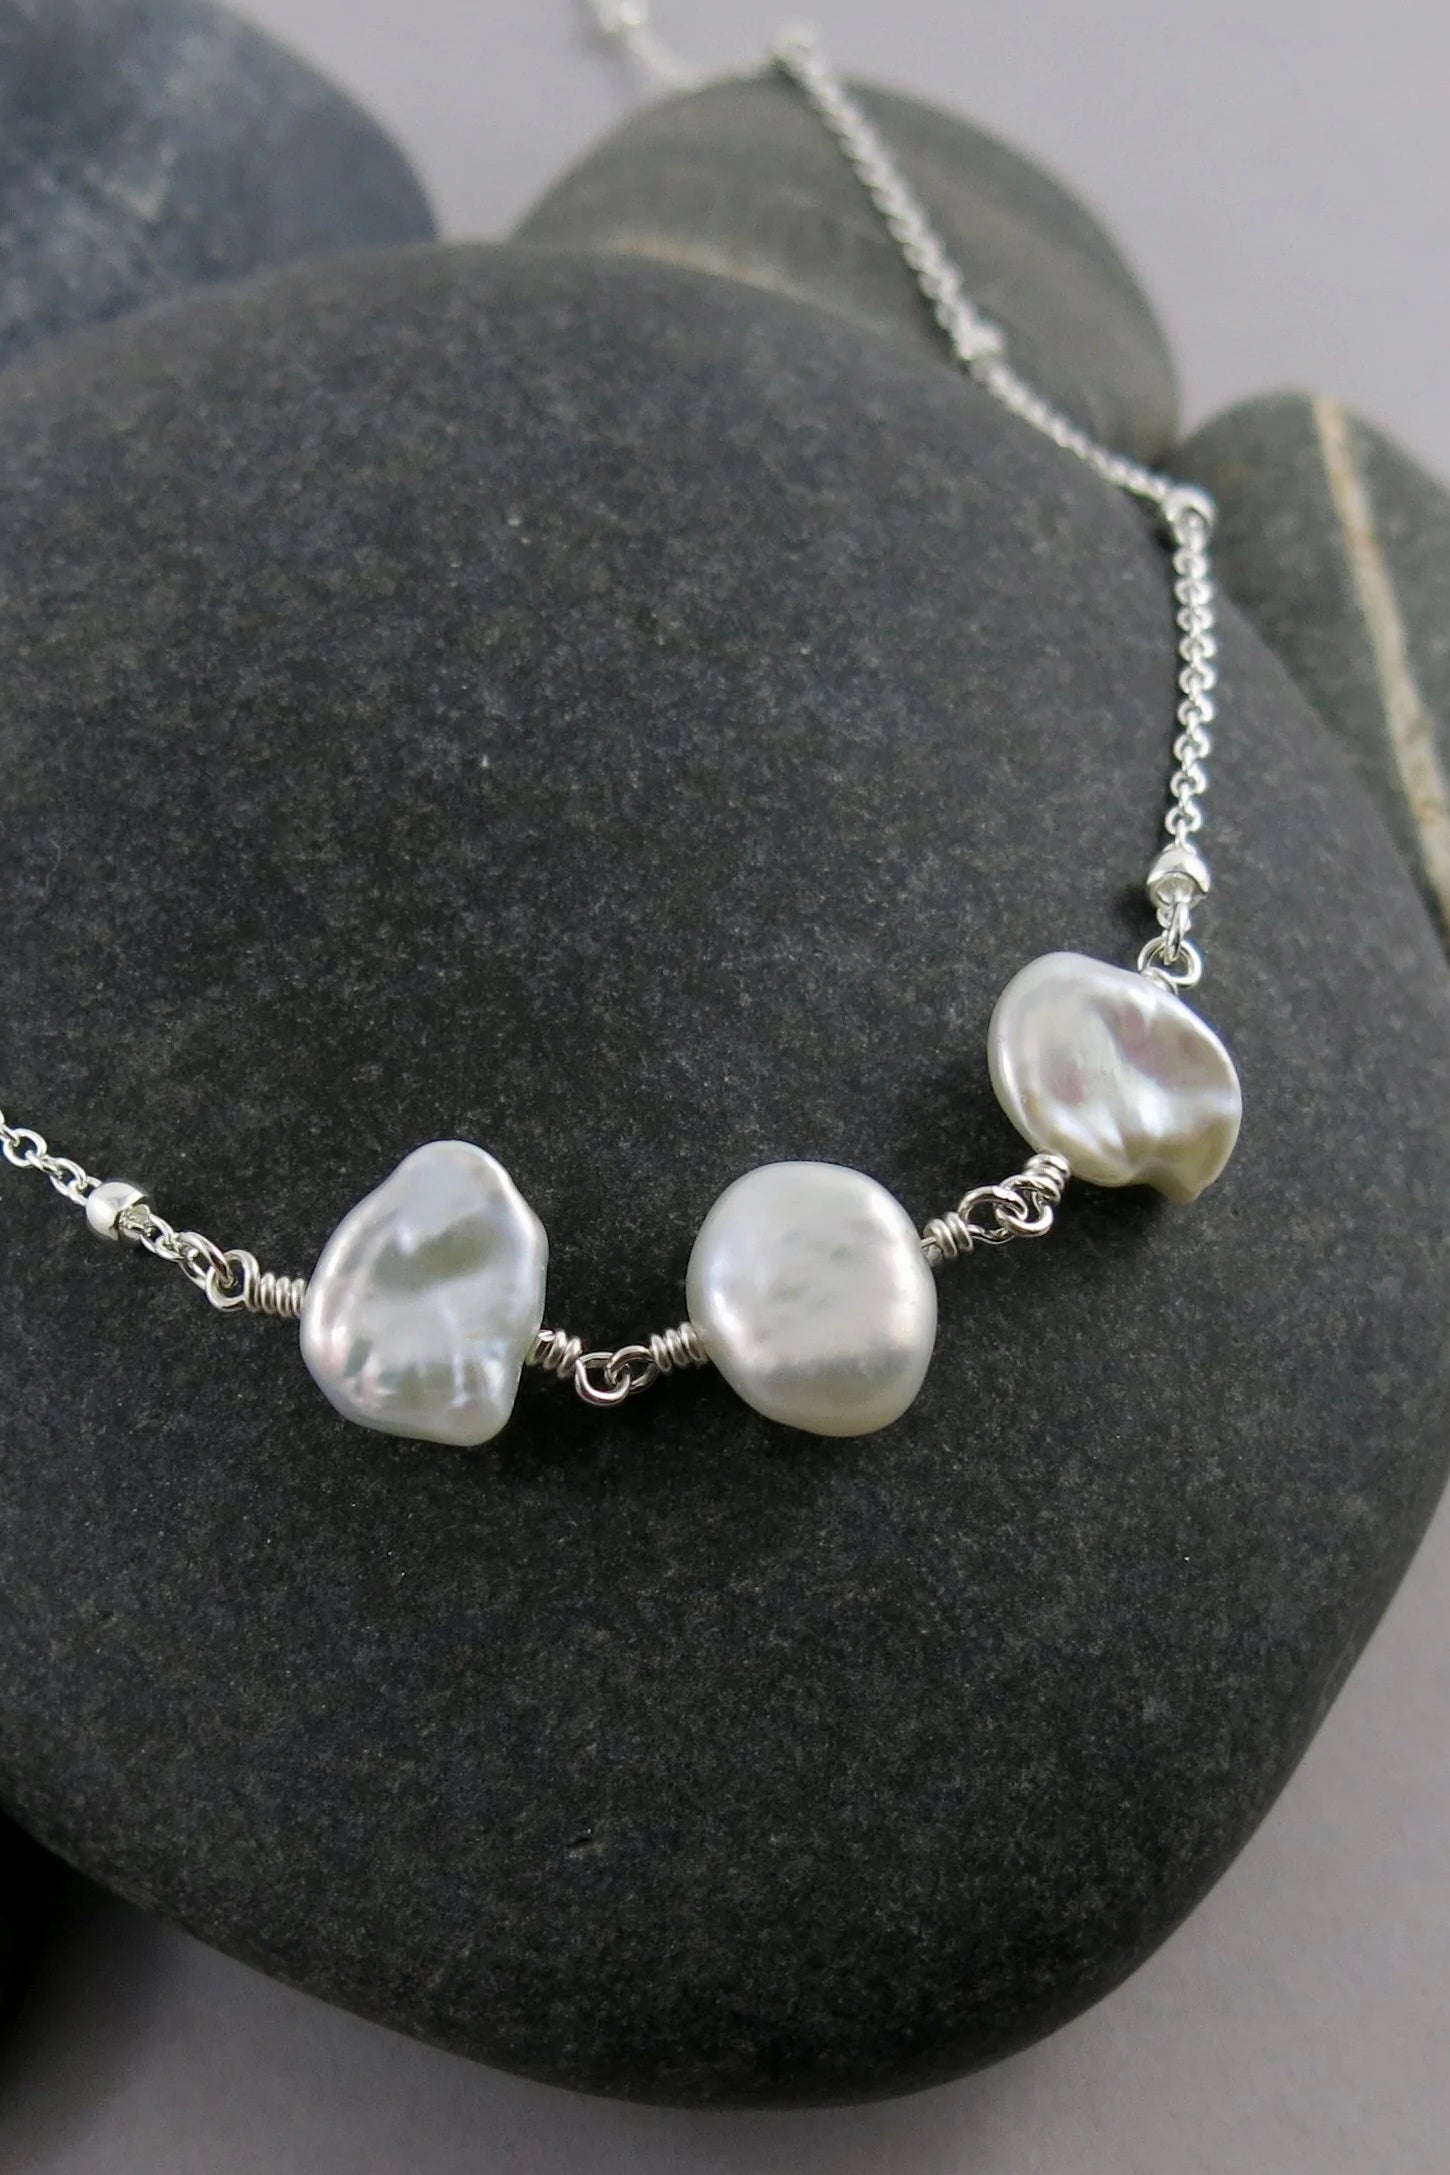 Keshi Pearl Trio Necklace by Mikel Grant, freshwater keshi pearls, sterling silver, made in Sechelt BC